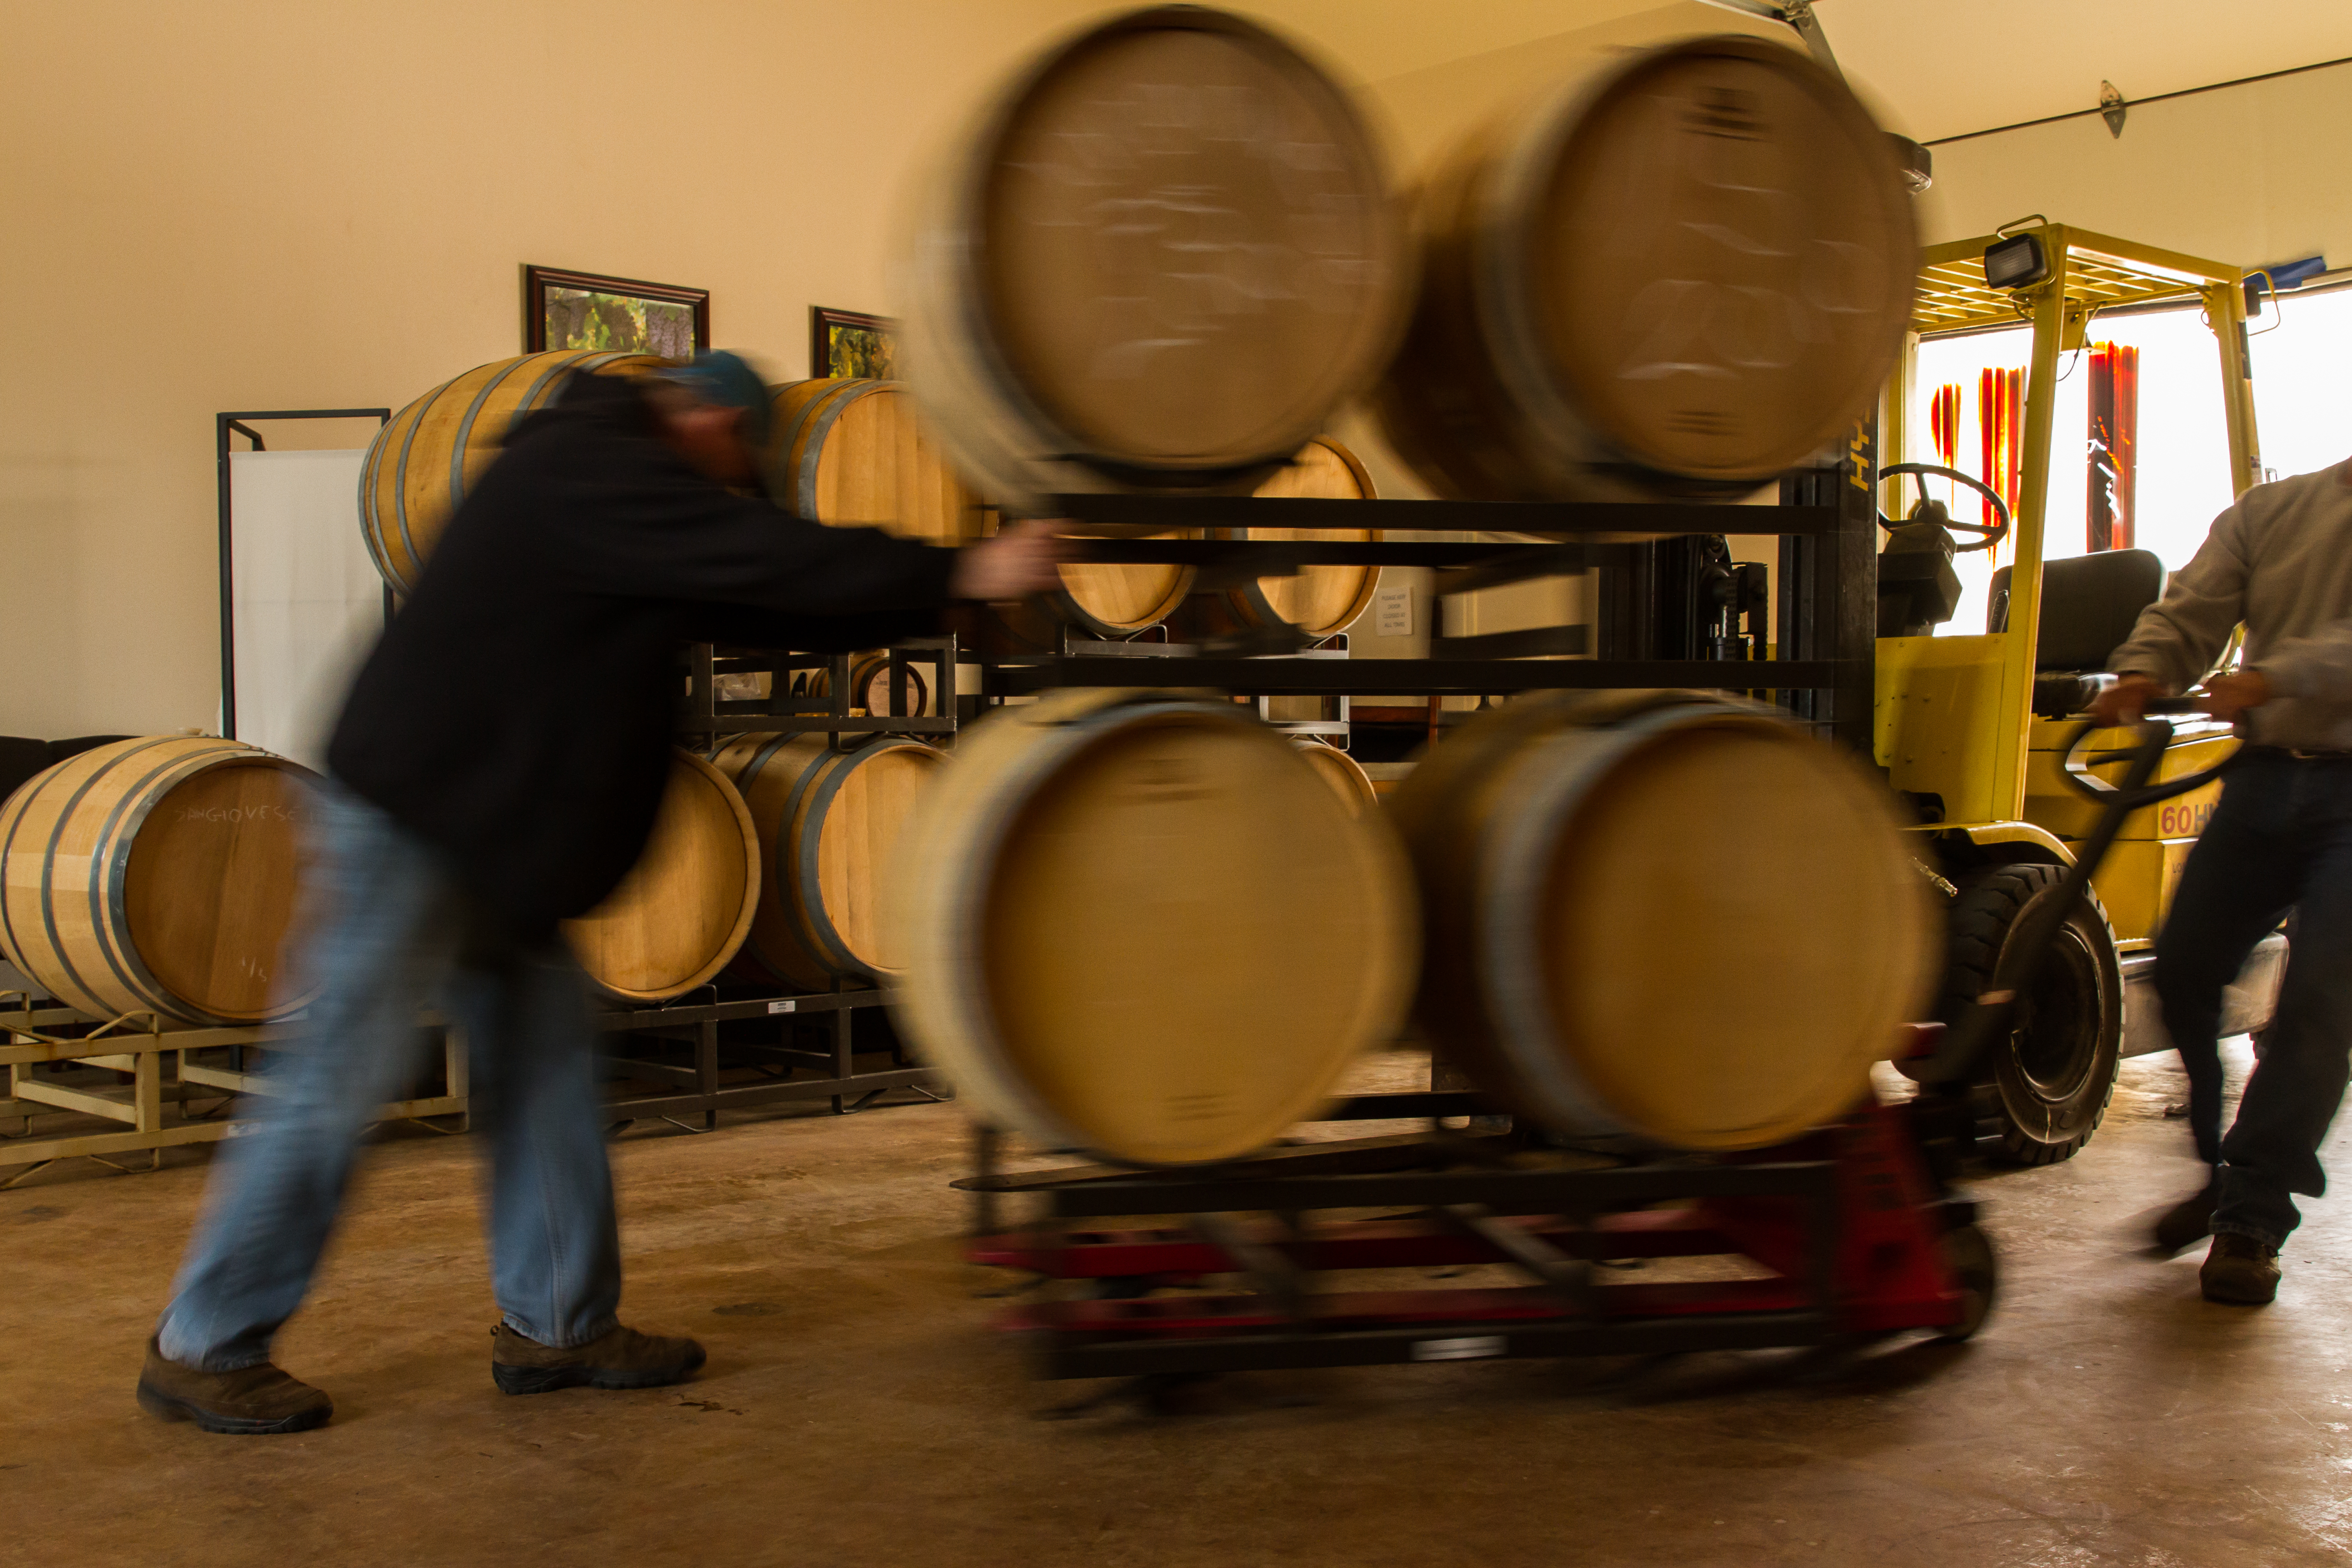 Barrels in Motion - Pic courtesy of Lash Photography